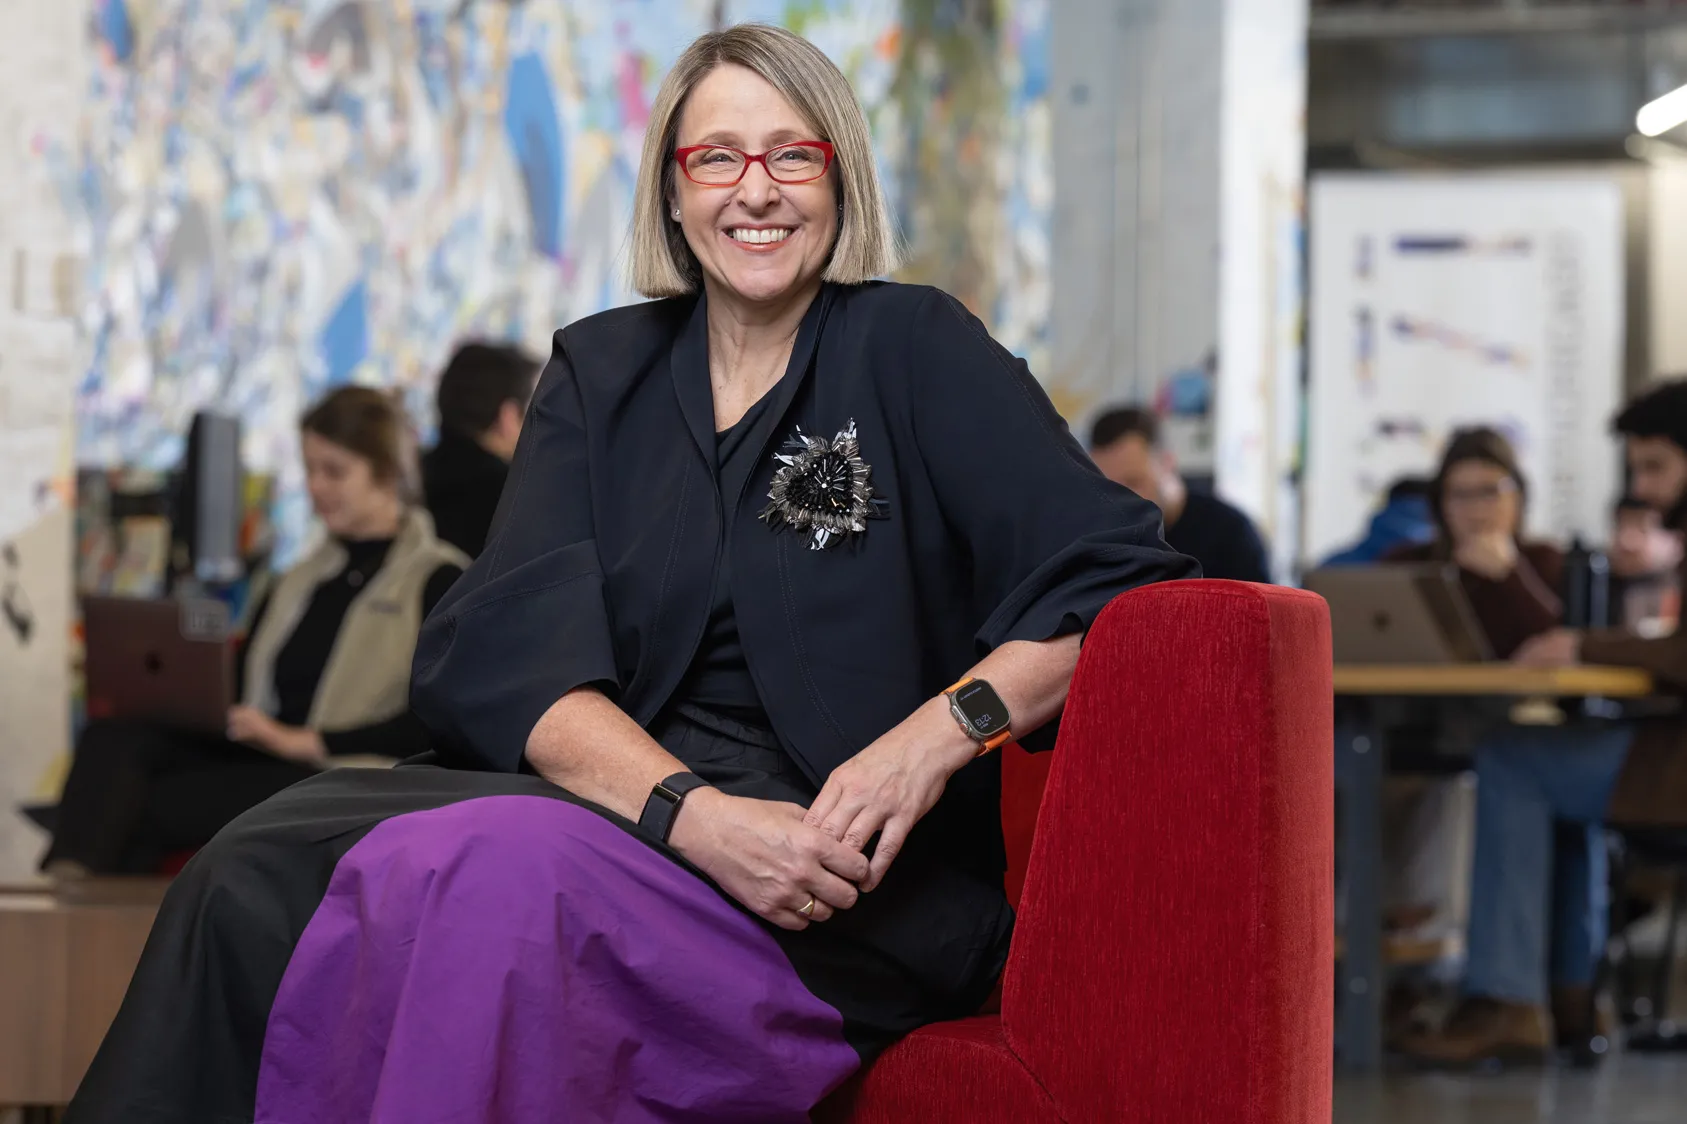 Betsy Ziegler sits on a modern upholstered chair in a space where many people in the background work or chat at small tables. A wall-size painting in the background adds to the lively feel of the scene, while Betsy poses with a genuine smile at the center of it. The middle-age white woman looks comfortable and stylish, with a chin-length haircut, stand-out glasses, modern-shaped clothes and a striking beaded broach that shines but also looks organically shaped. 